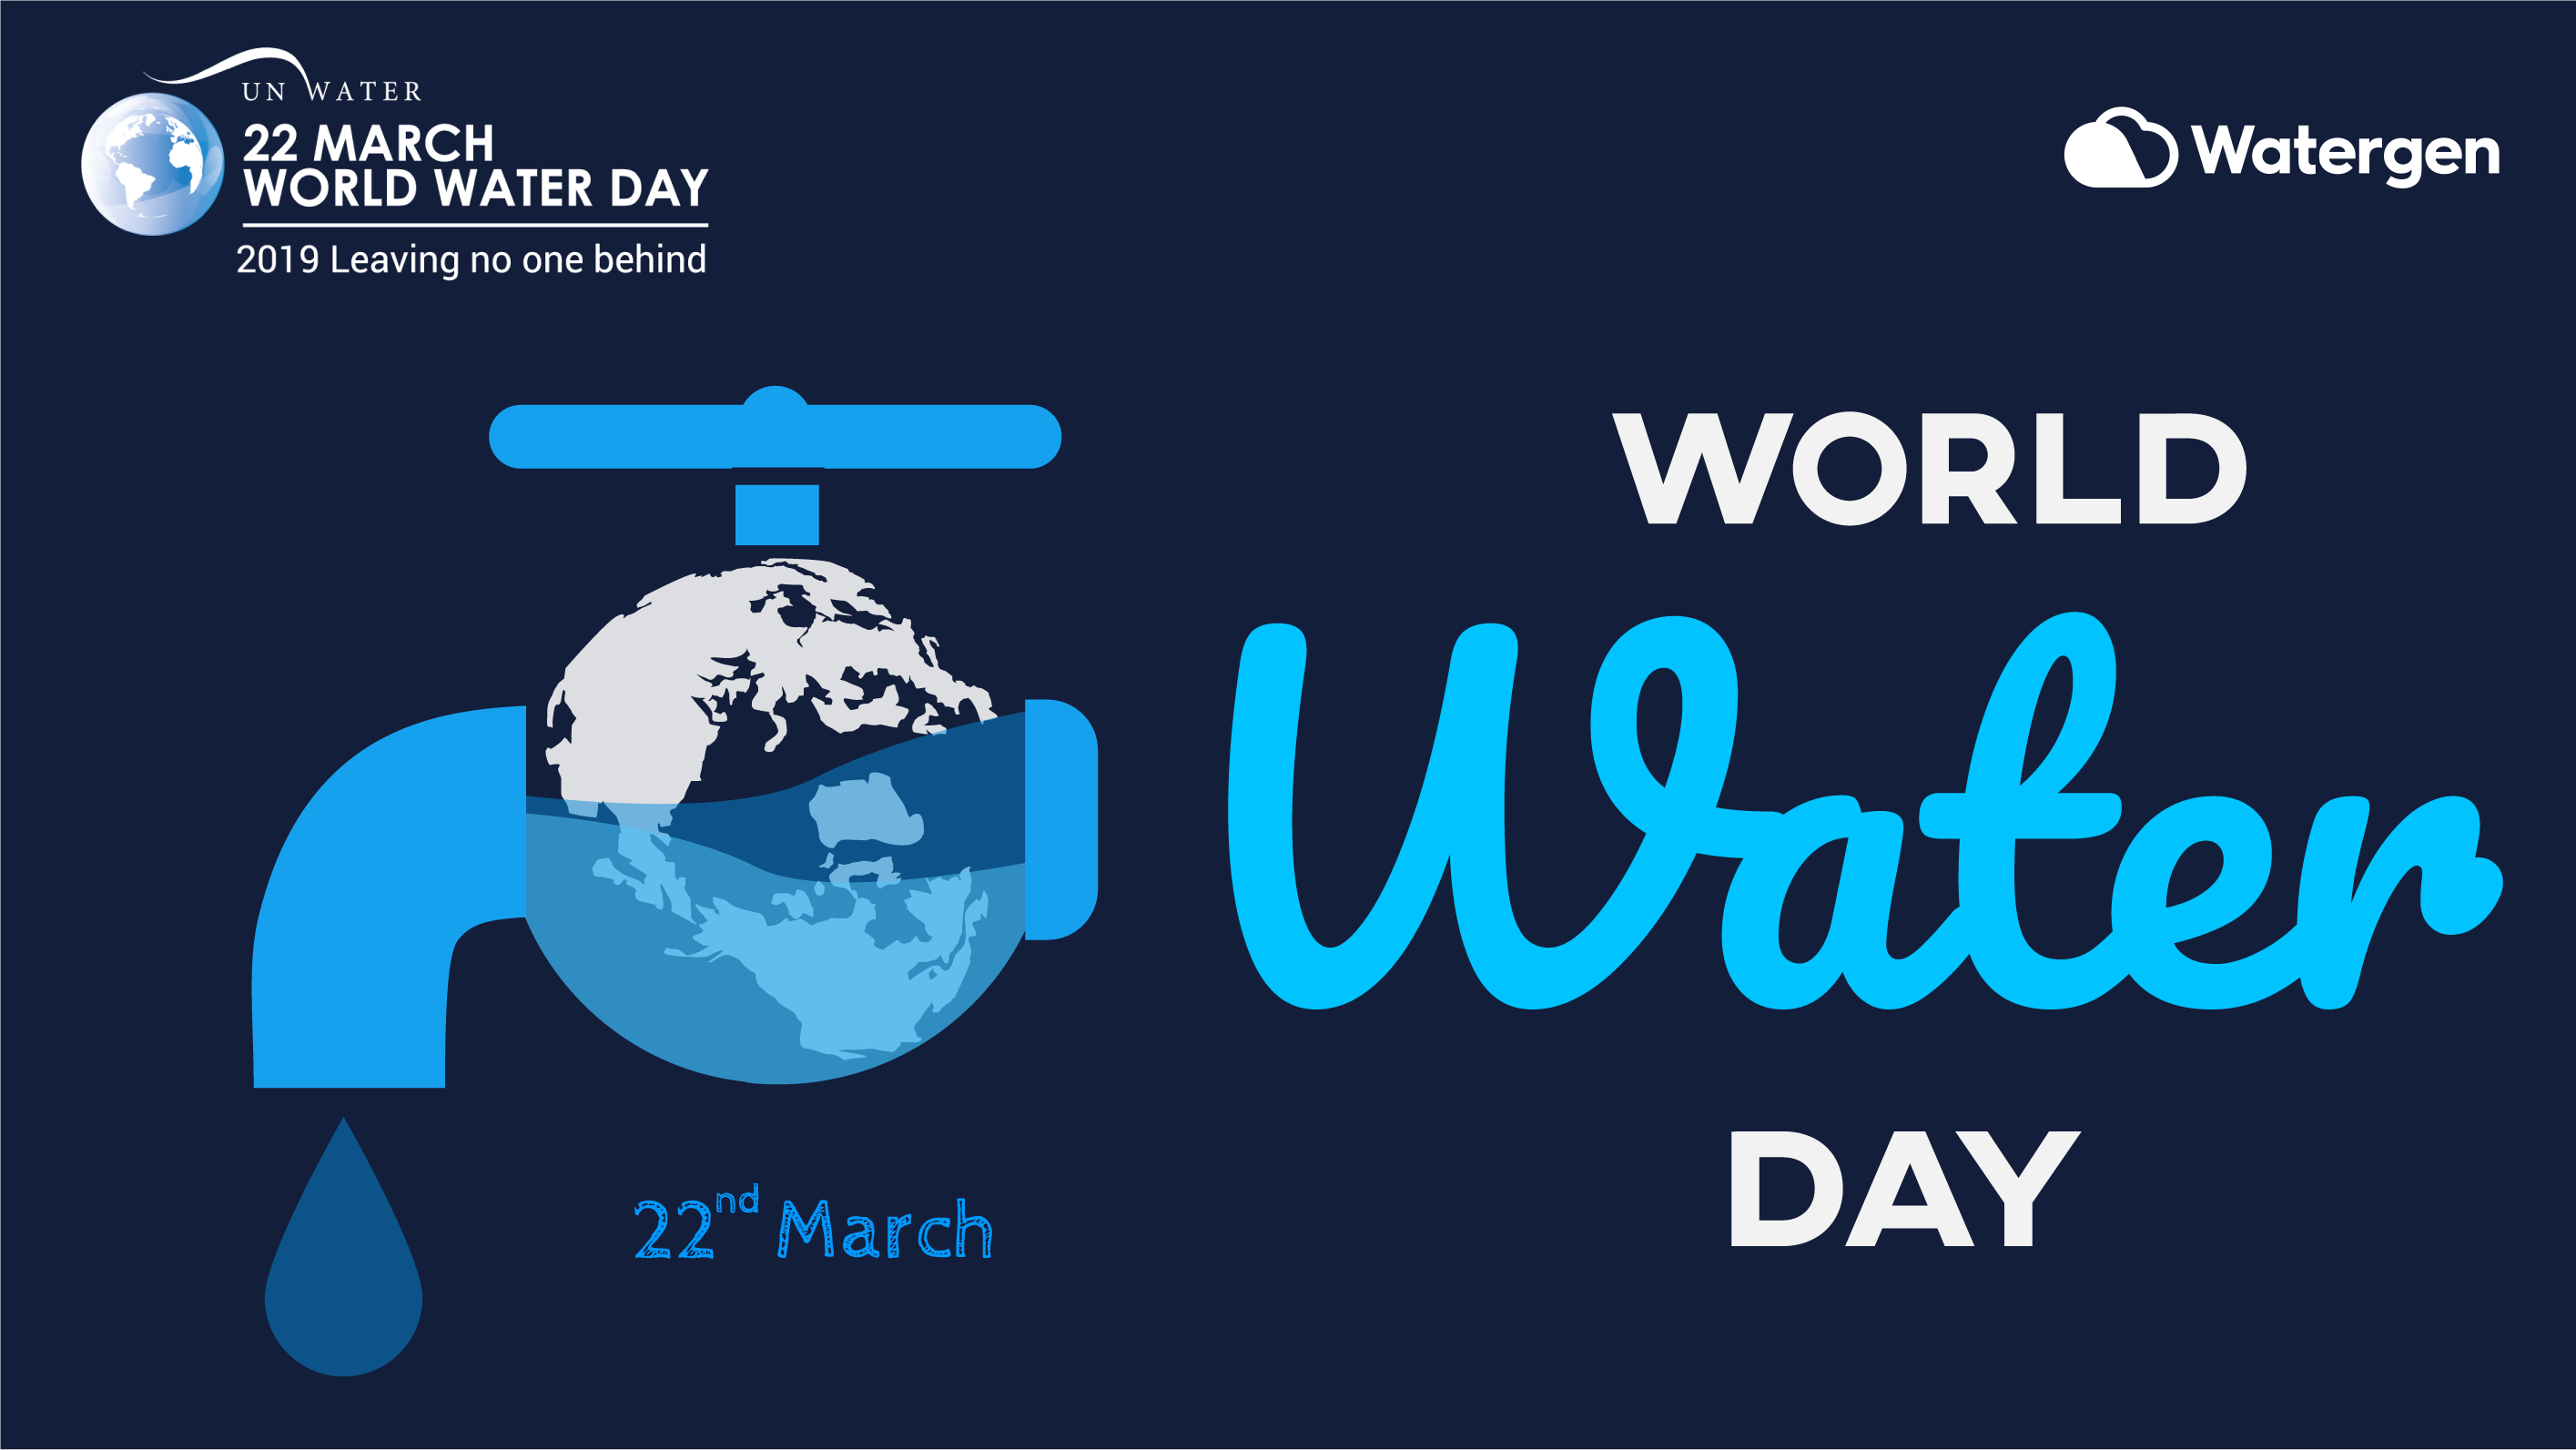 In Spirit of World Water Day, Watergen Donates a Machine that makes Water out of Air to the Country of Antigua and Barbuda